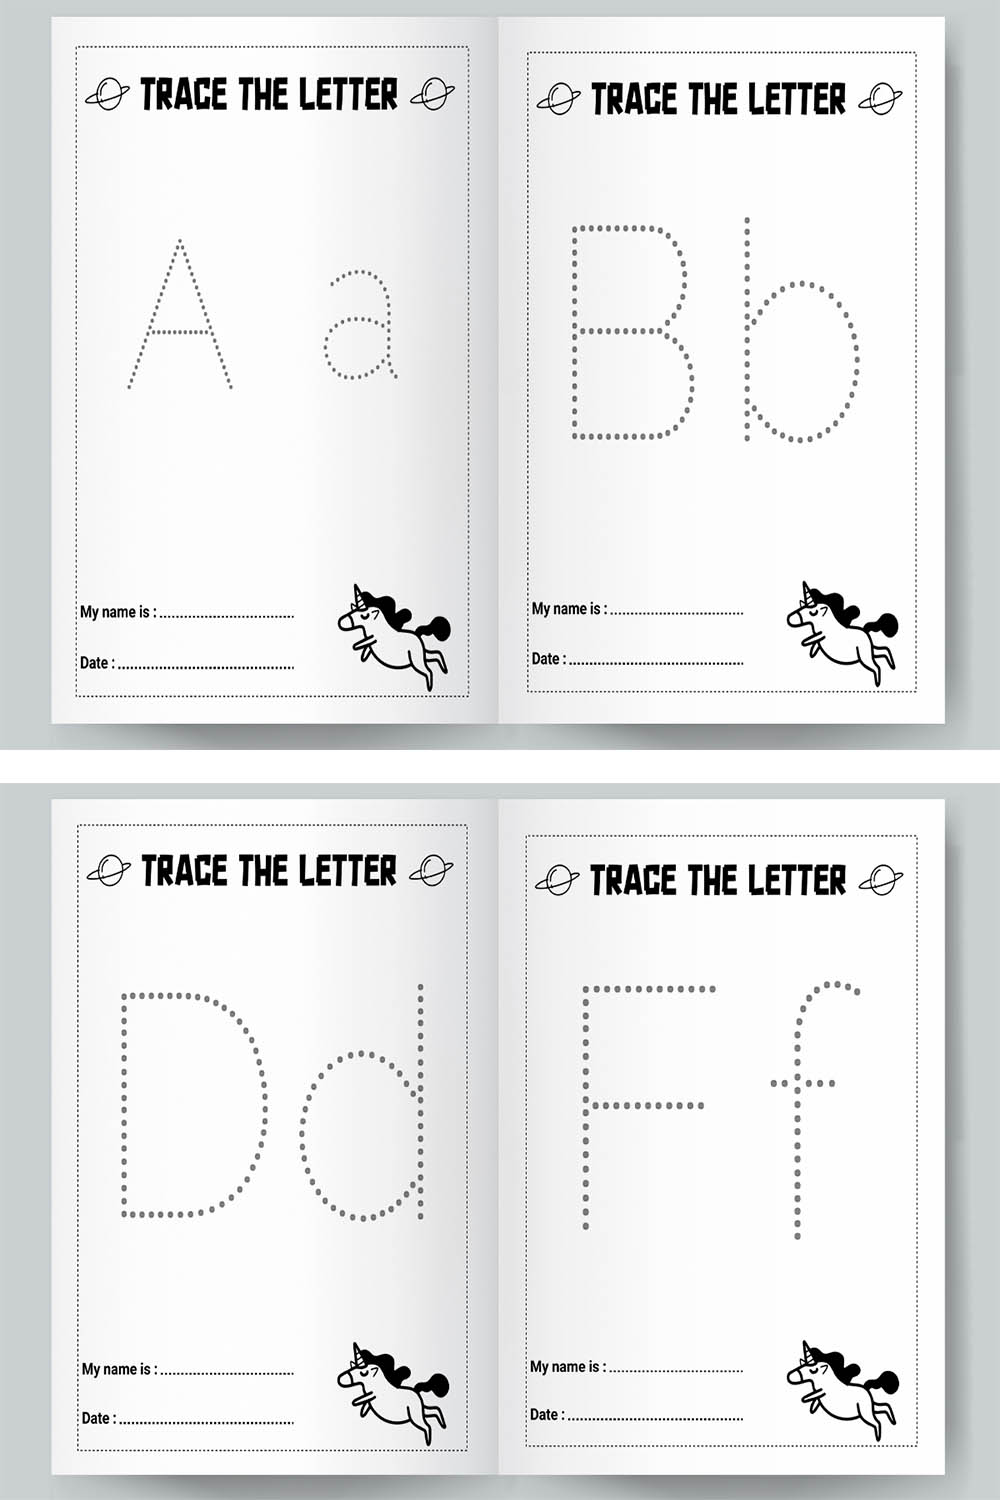 Letters Tracing Single Letter Upper and Lower pinterest image.